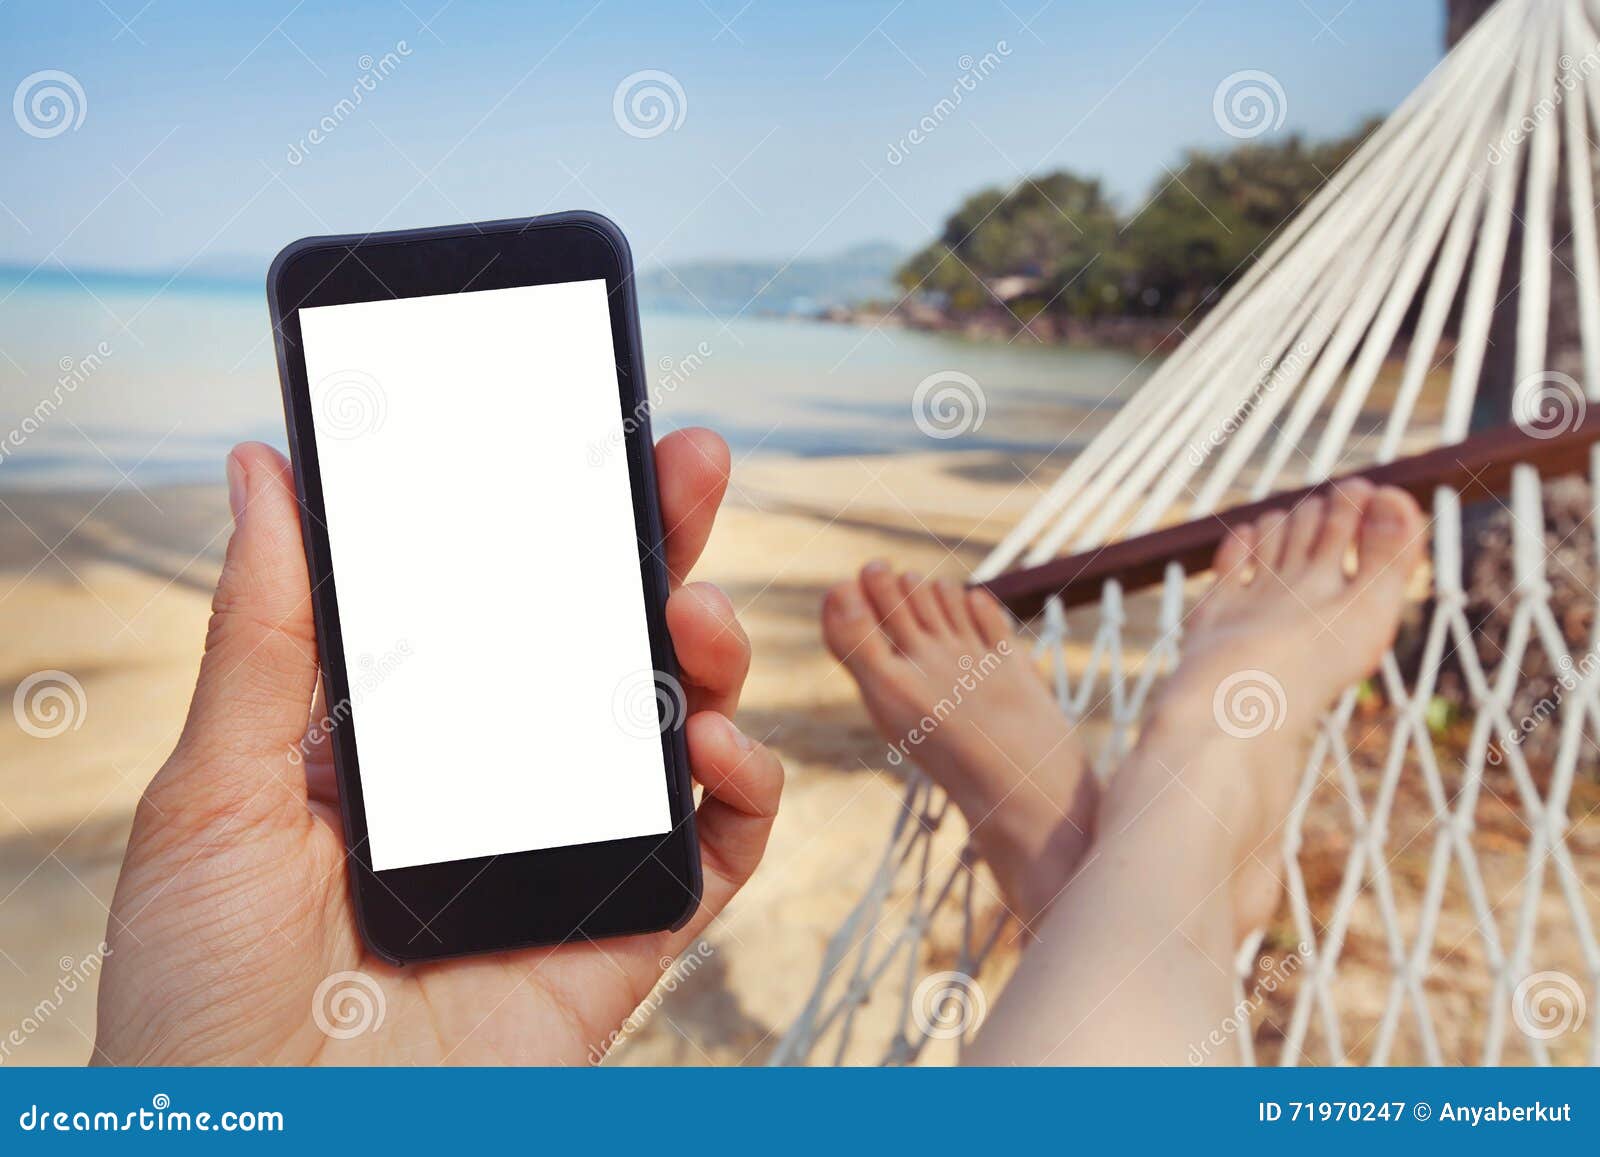 mobile application for travels, phone in hand, beach